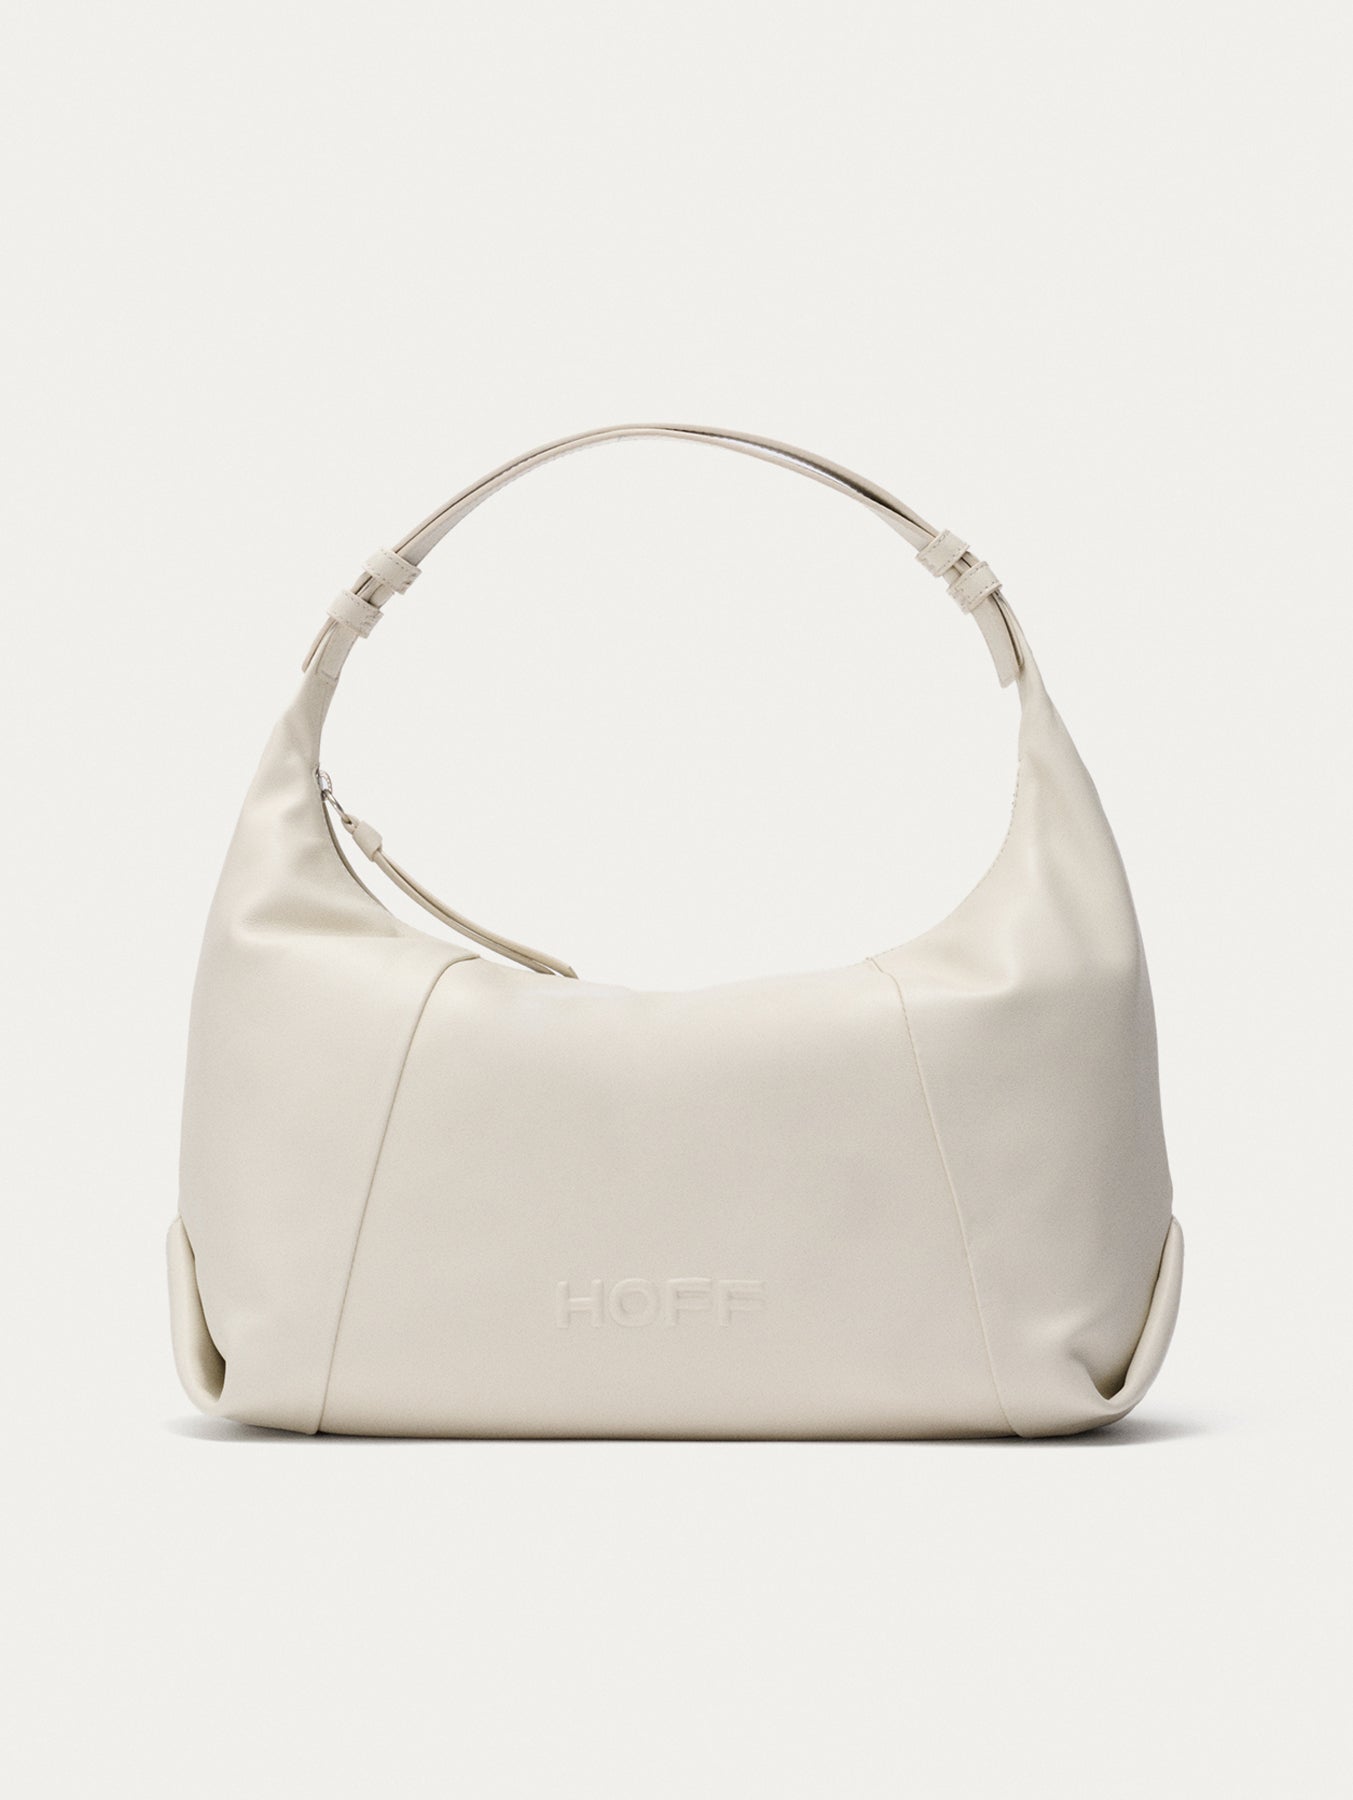 LEATHER HOBO MUSEUM OFF WHITE BAG 